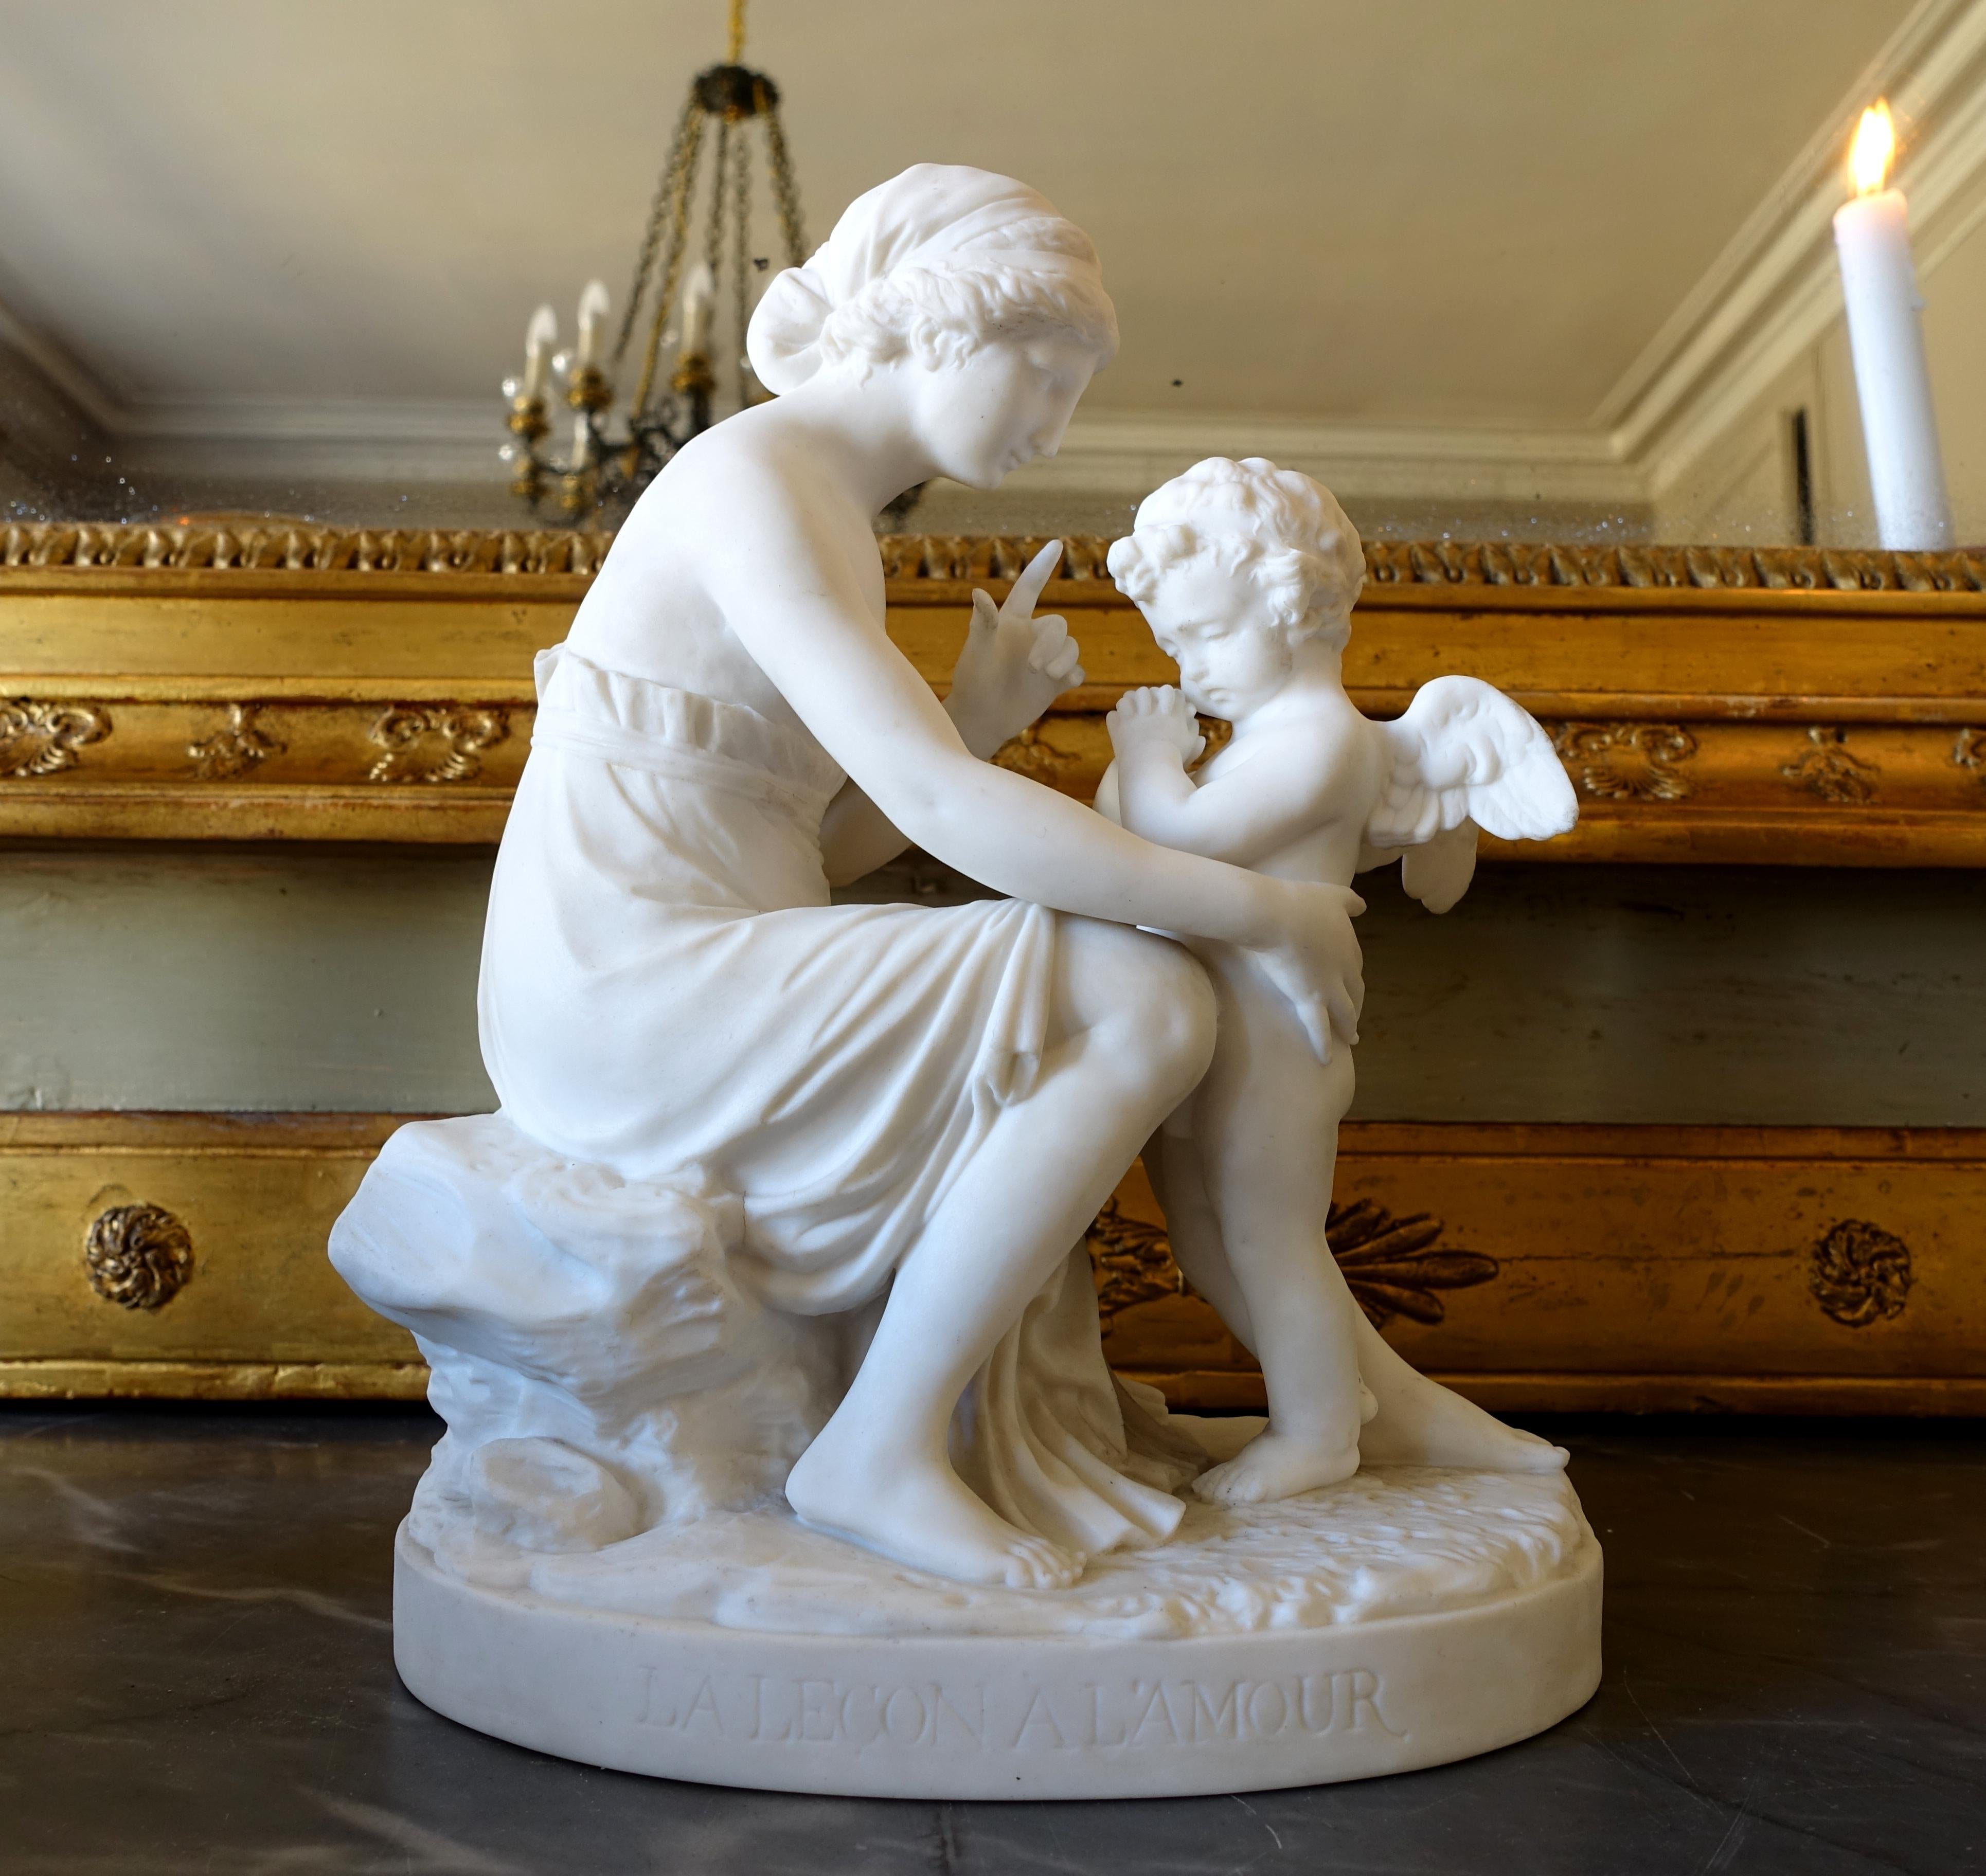 Neoclassical style porcelain biscuit scene featuring the Lesson to Love after the work of Louis Simon Boizot : a woman wearing an antique-style dress sermonizing at Love, a remorseful putti.
Louis Simon Boizot is one of the most famous 18th century